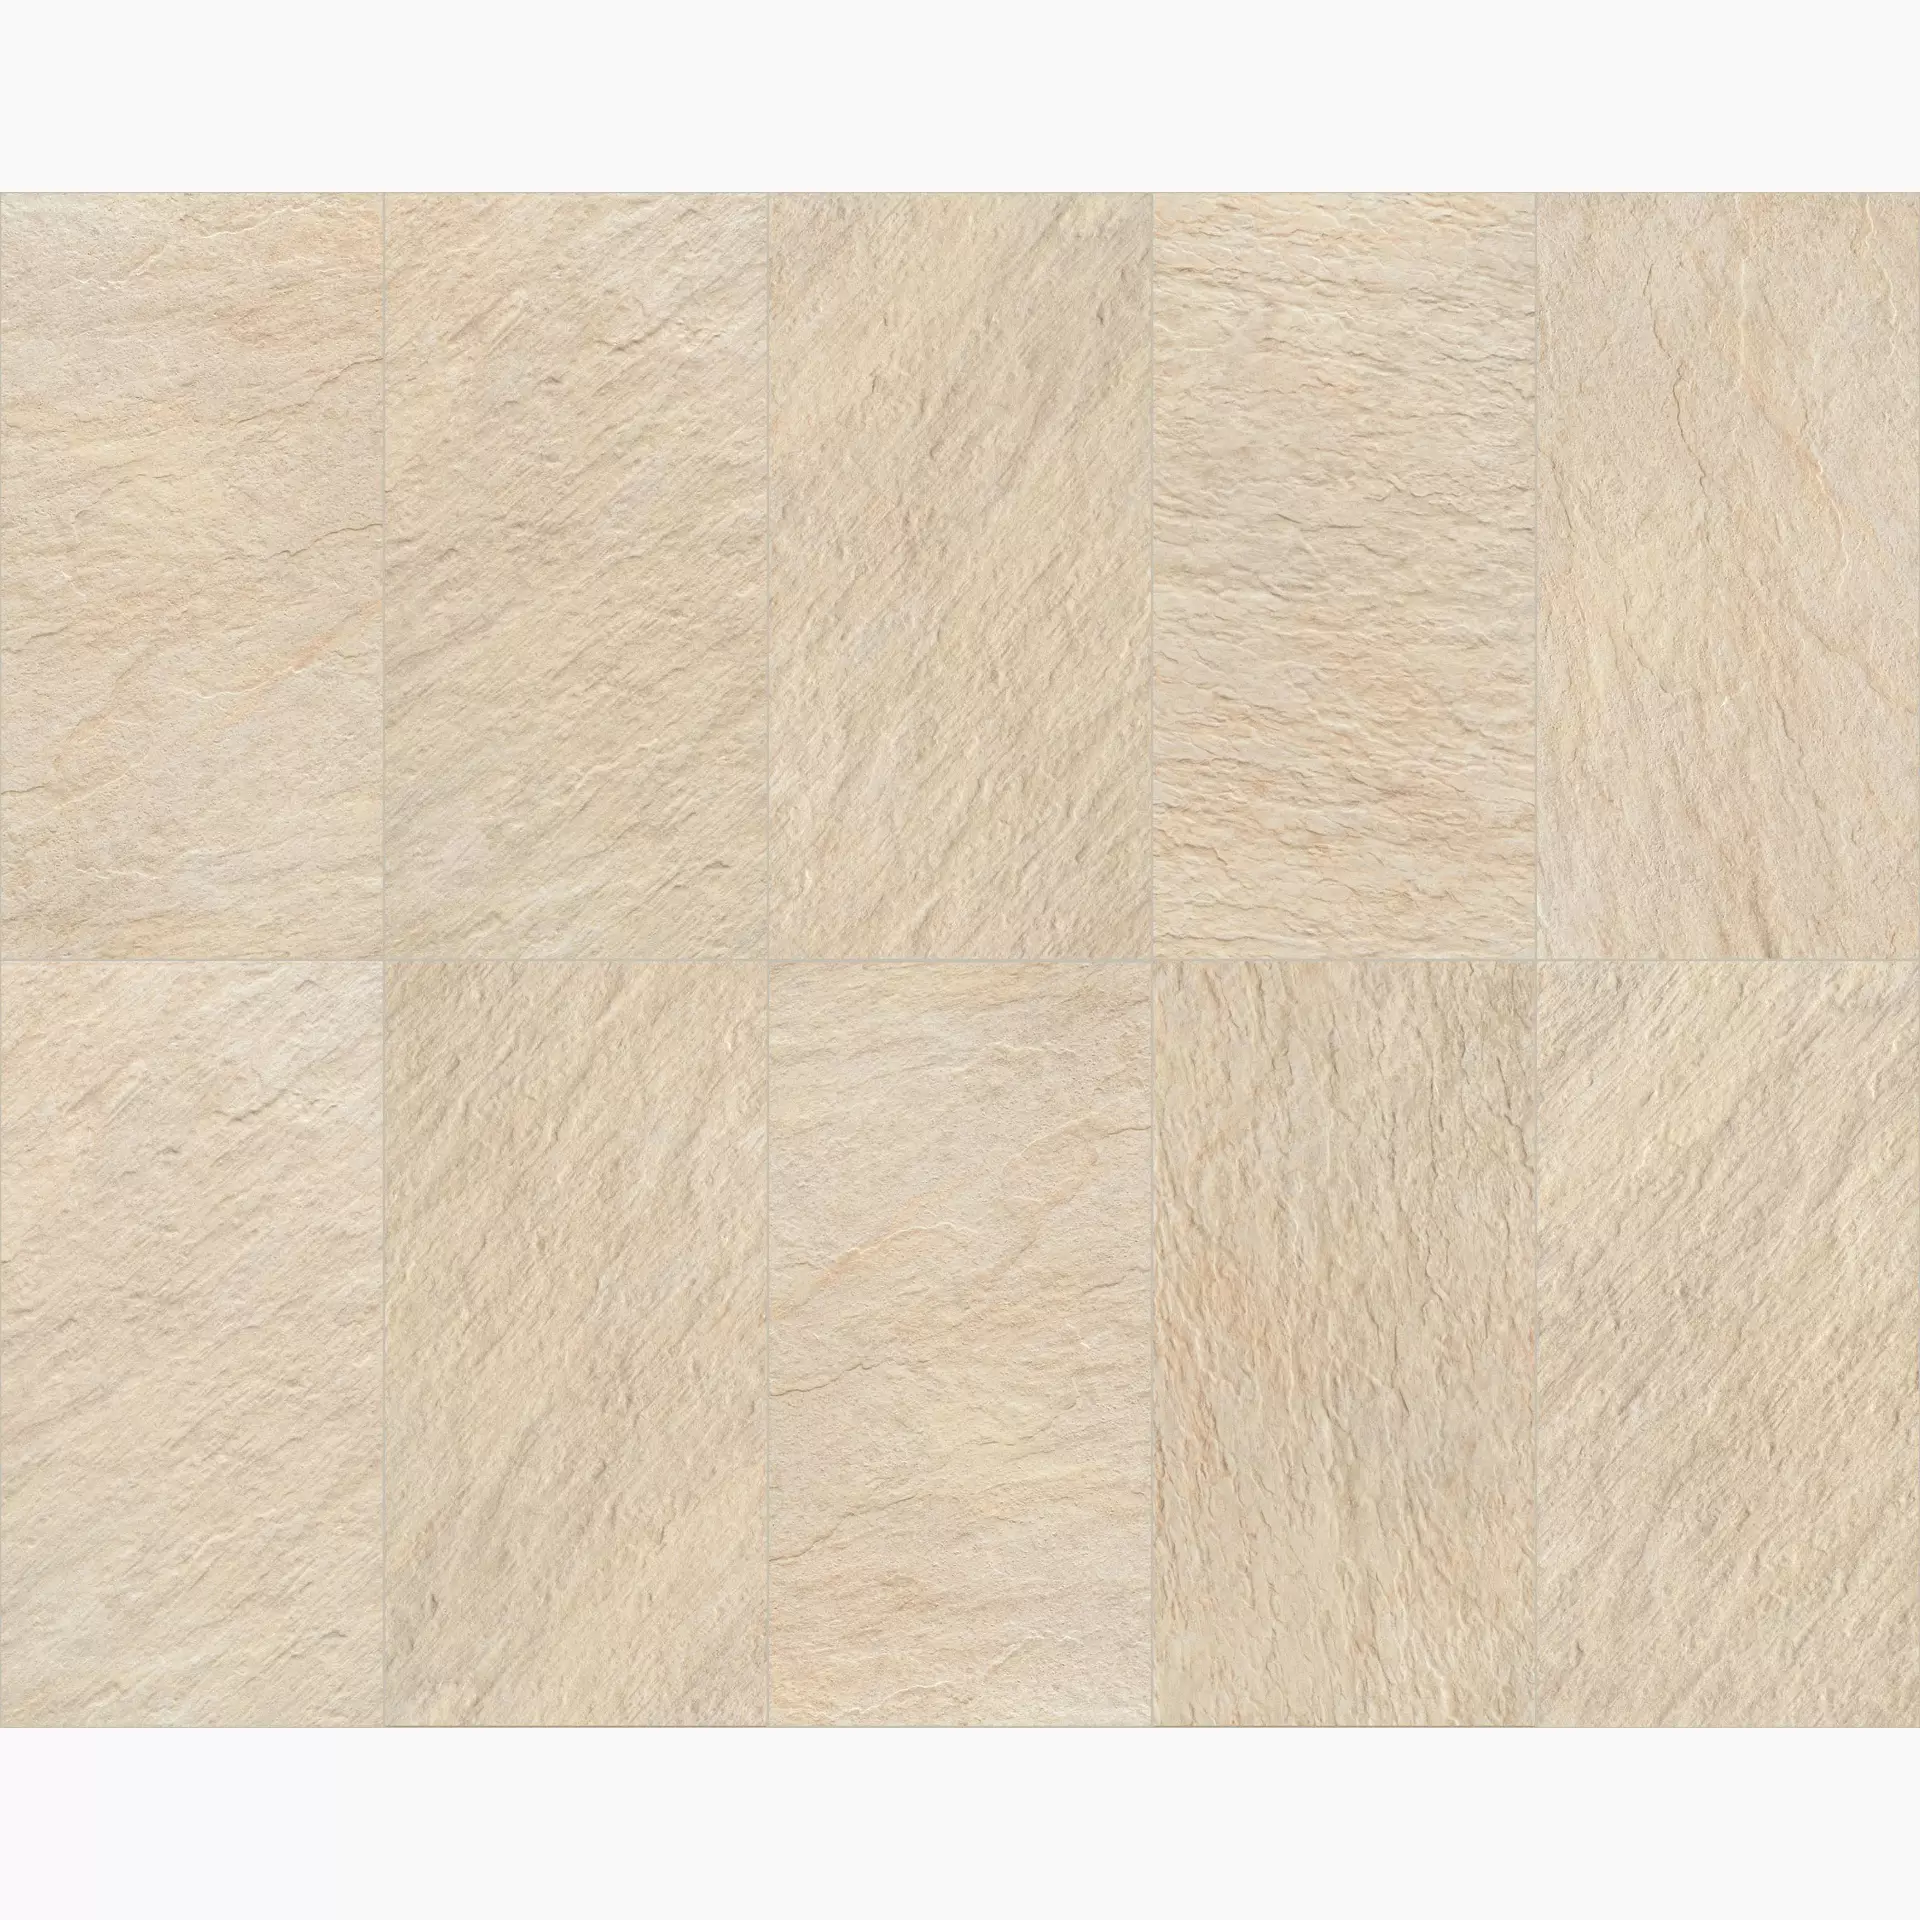 Keope Percorsi Extra Pietra Di Barge Strutturato 4A36314C 30x60cm rectified 9mm